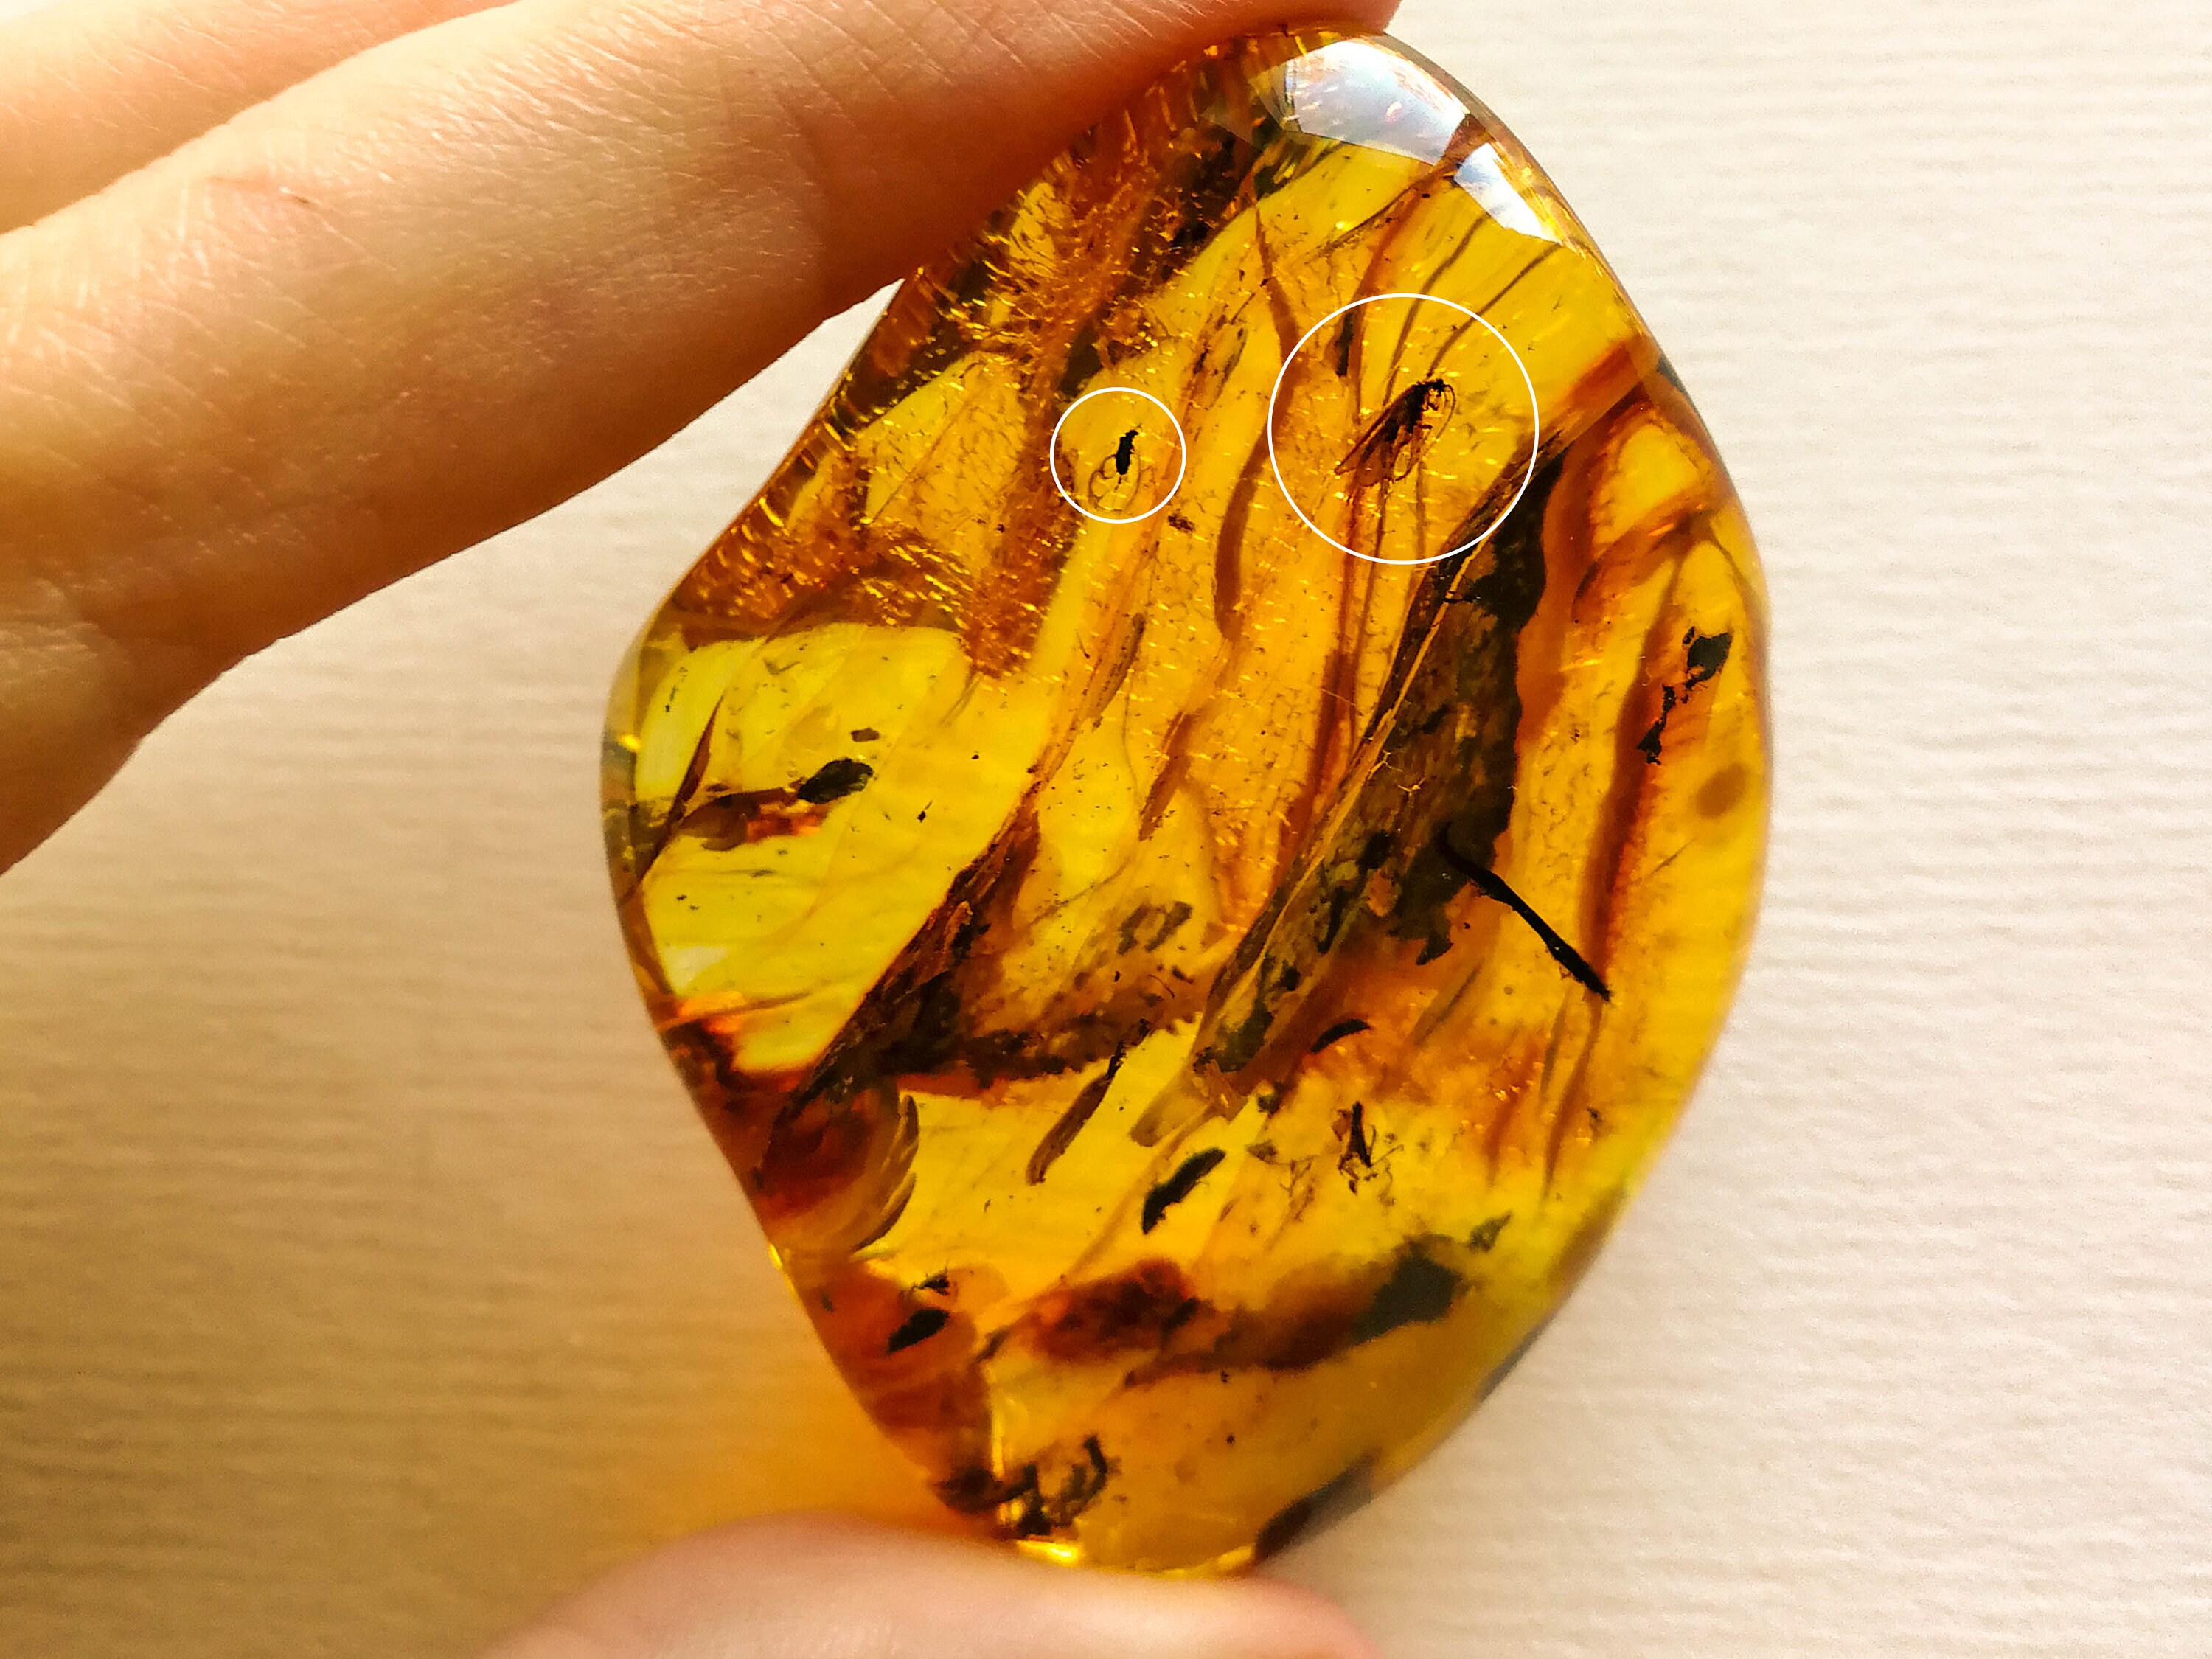 Orange Amber Stone With Insects, Large Thick Amber Resin Small Bits  Souvenir, Spiritual Light Yellow Amber Decoration Inclusions Gift Idea 